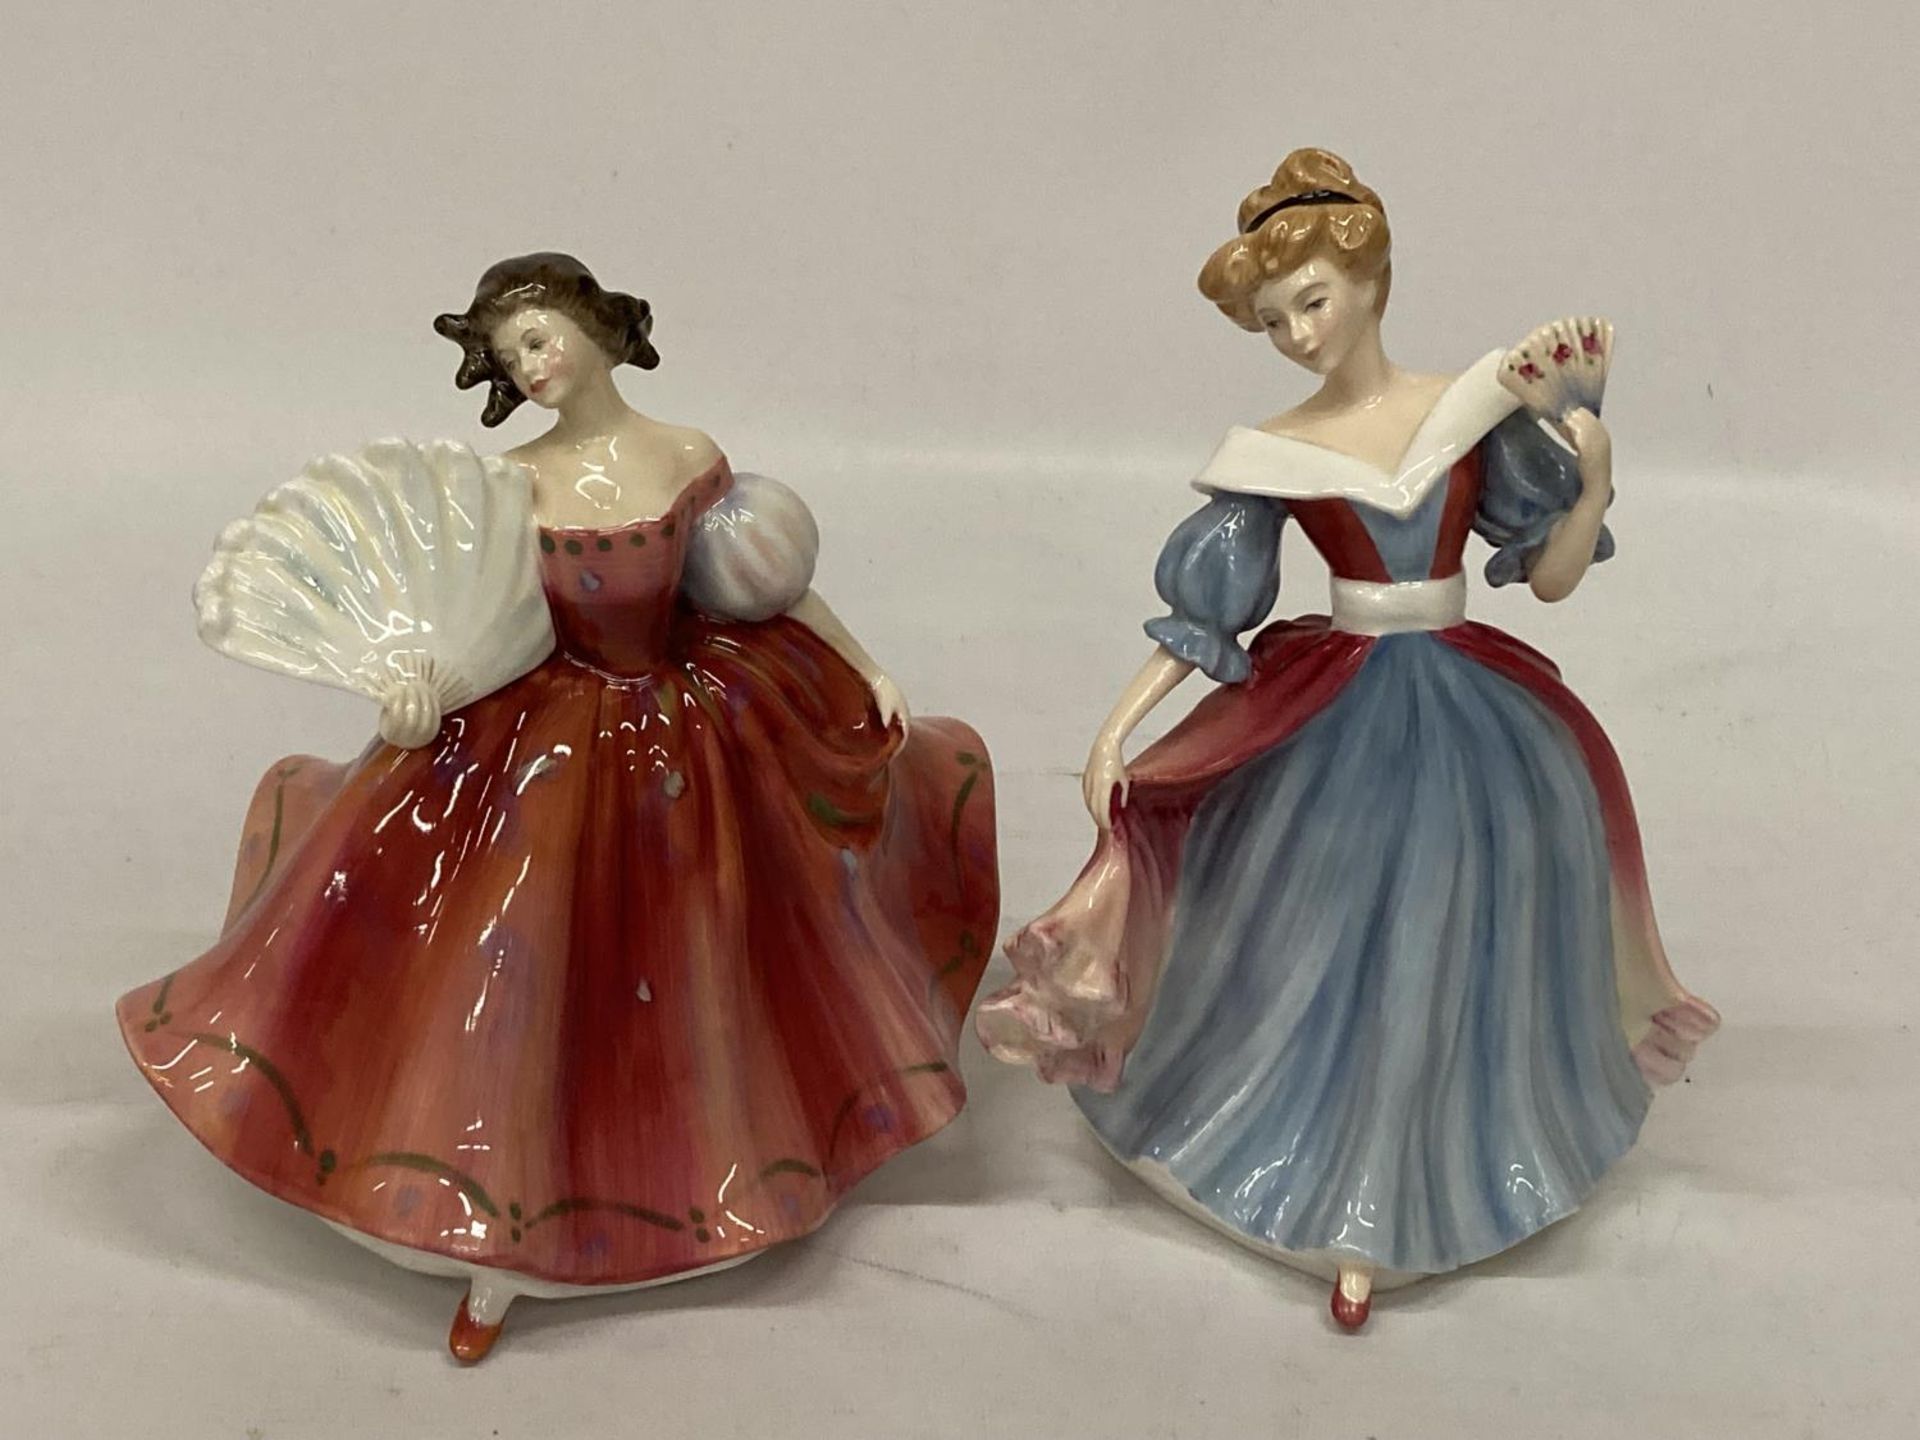 TWO ROYAL DOULTON FIGURINES "FIRST WALTZ" HN2862 AND "FIGURE OF THE YEAR AMY" HN2216